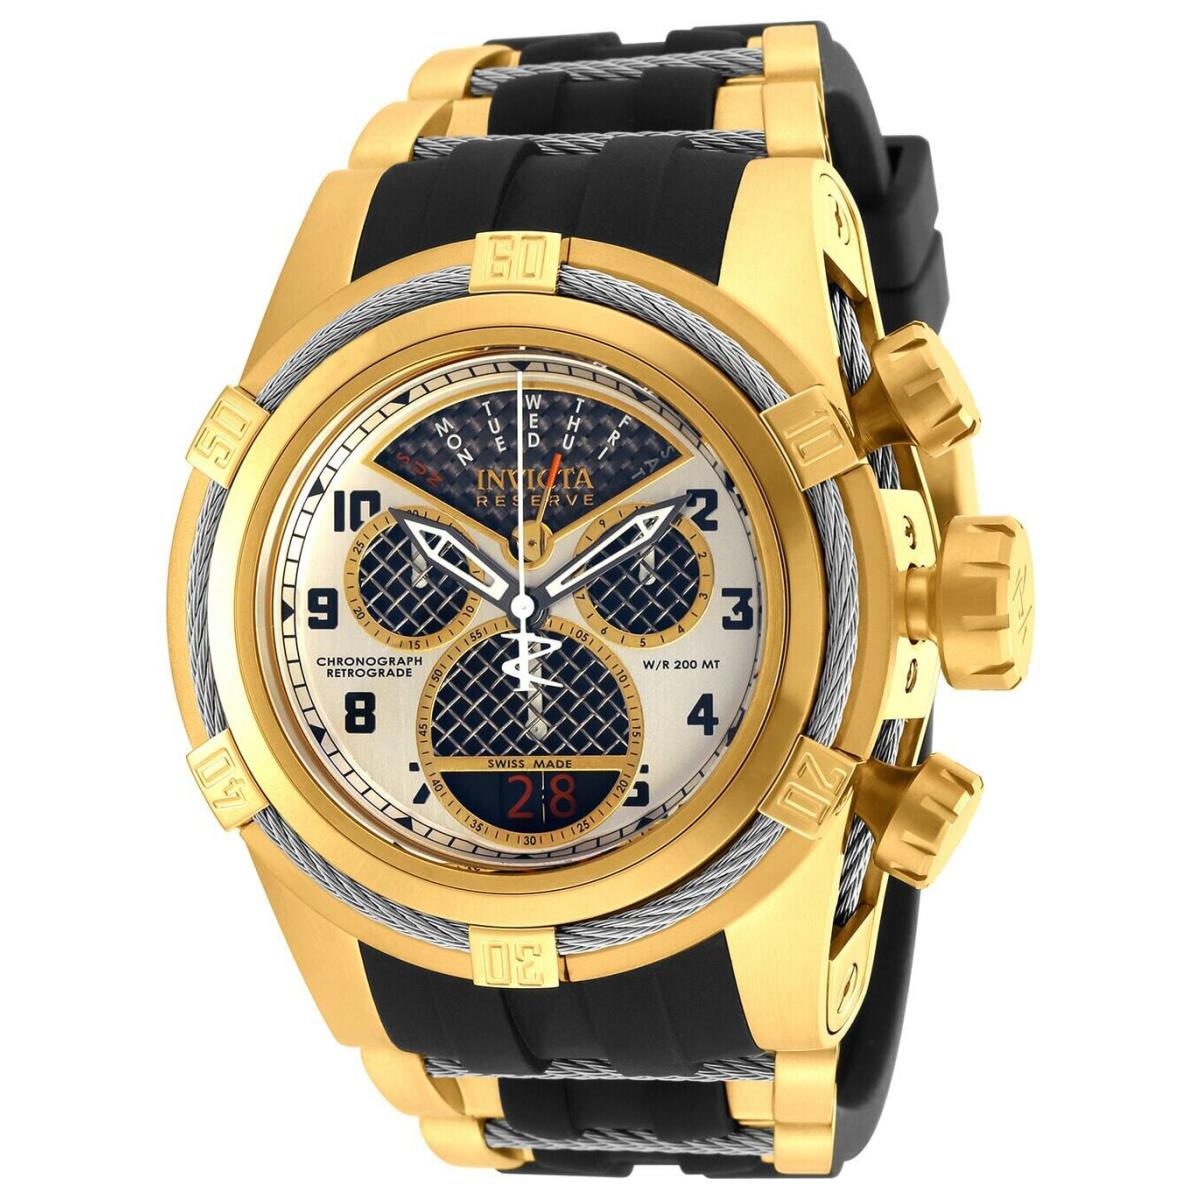 16317 Invicta Reserve 52mm Bolt Zeus Swiss Chrono Stainless Steel Bracelet Watch - Silver Dial, Gold Band, Multicolor Bezel